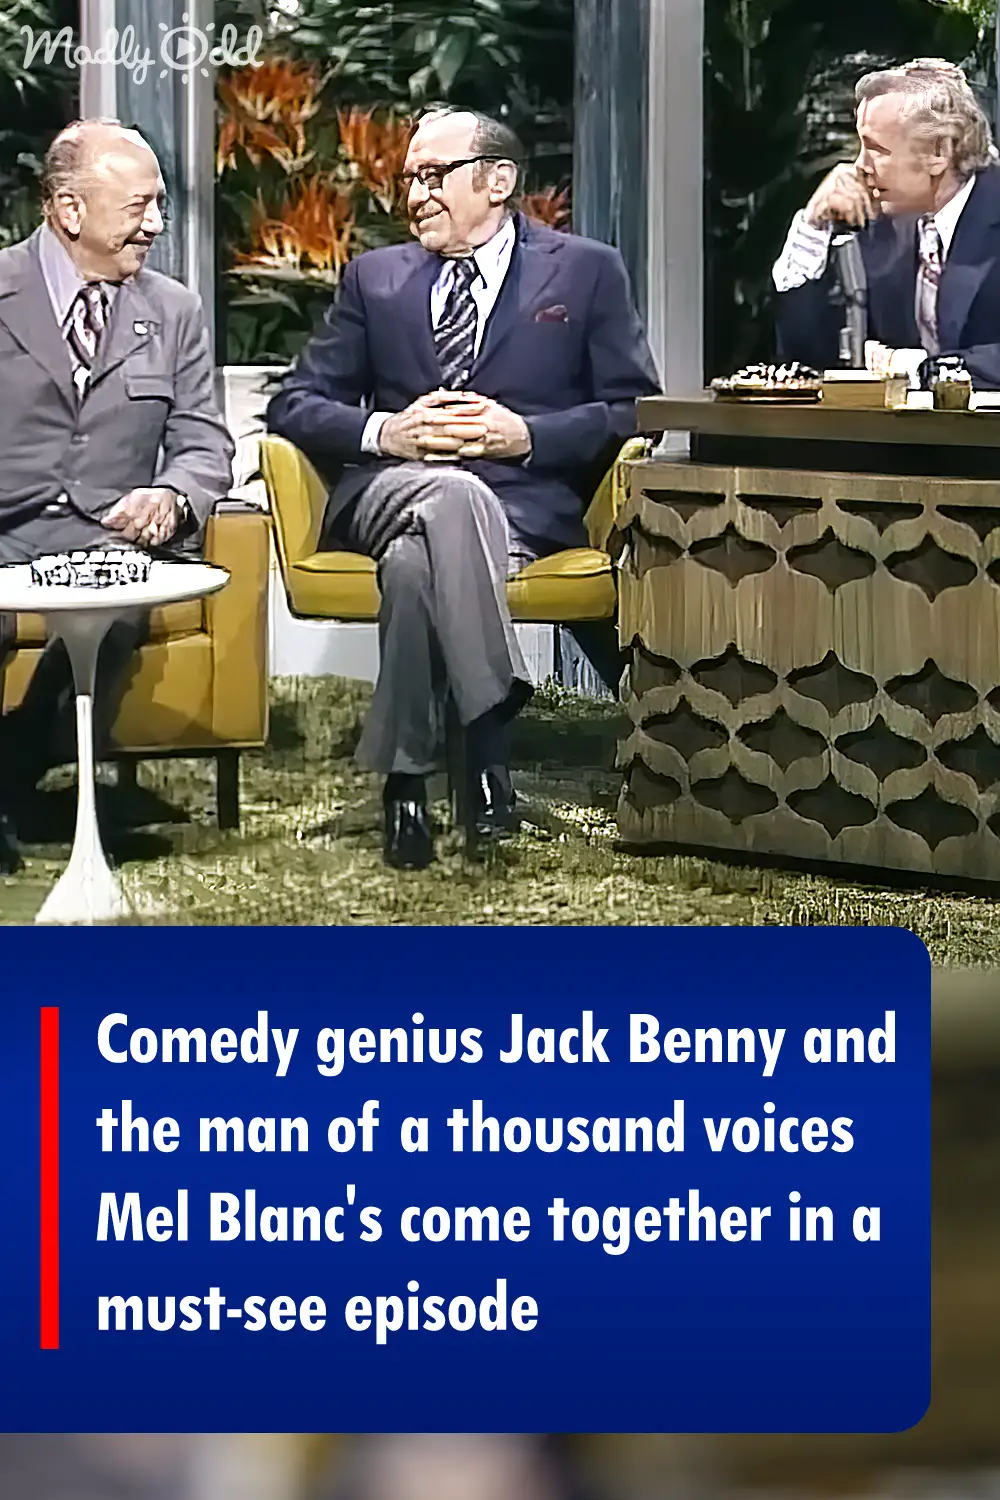 Comedy genius Jack Benny and the man of a thousand voices Mel Blanc's come together in a must-see episode